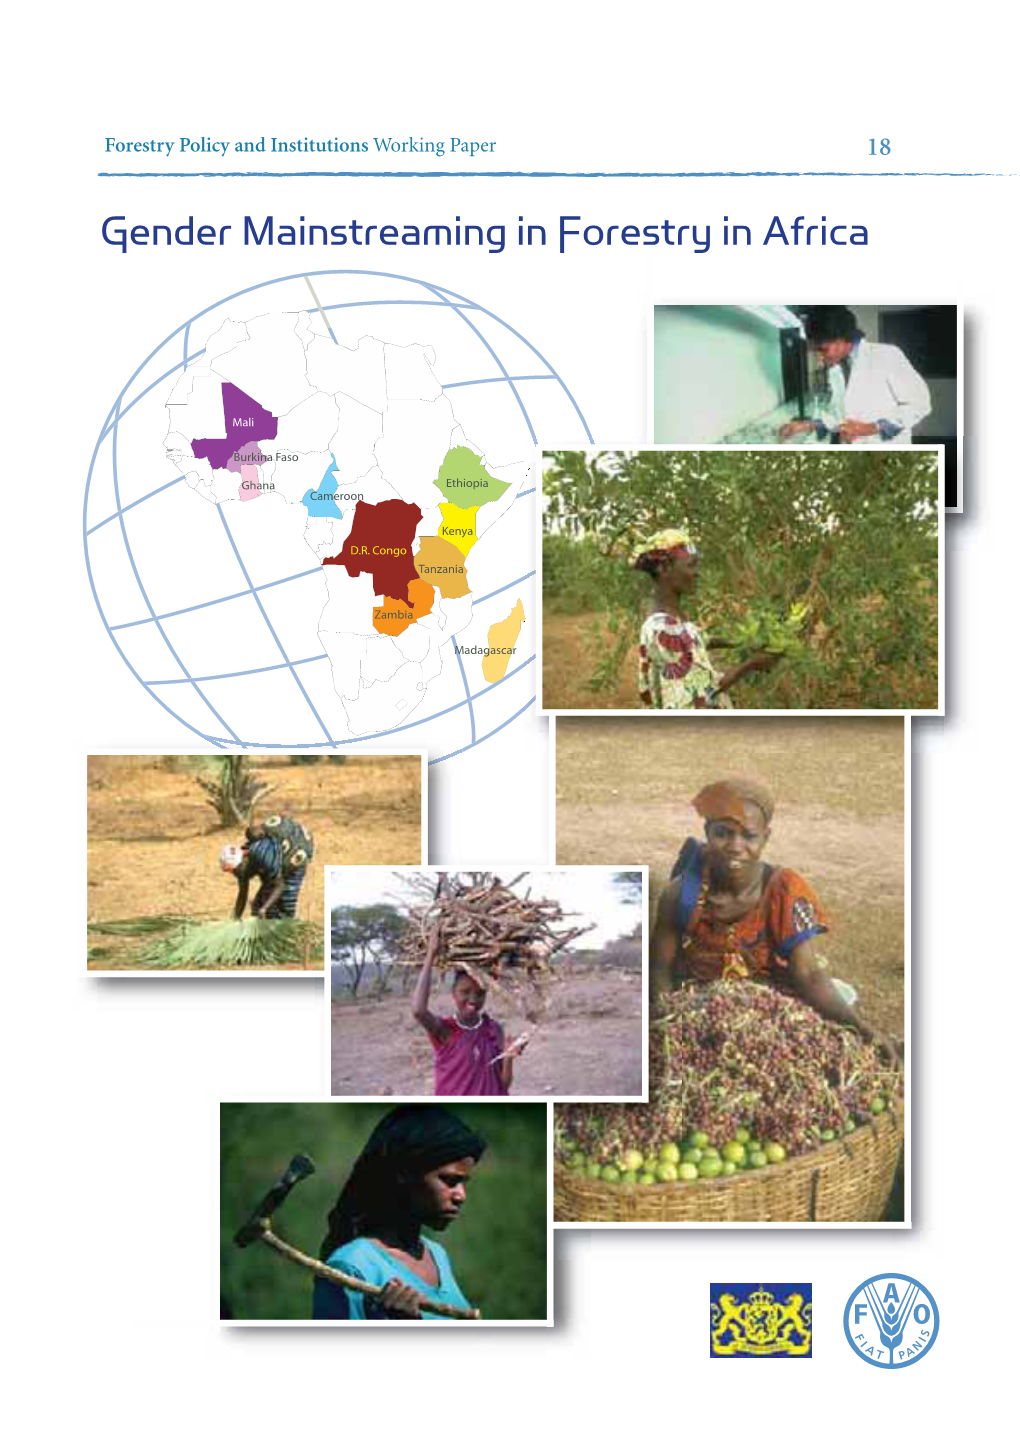 Gender Mainstreaming in Forestry in Africa